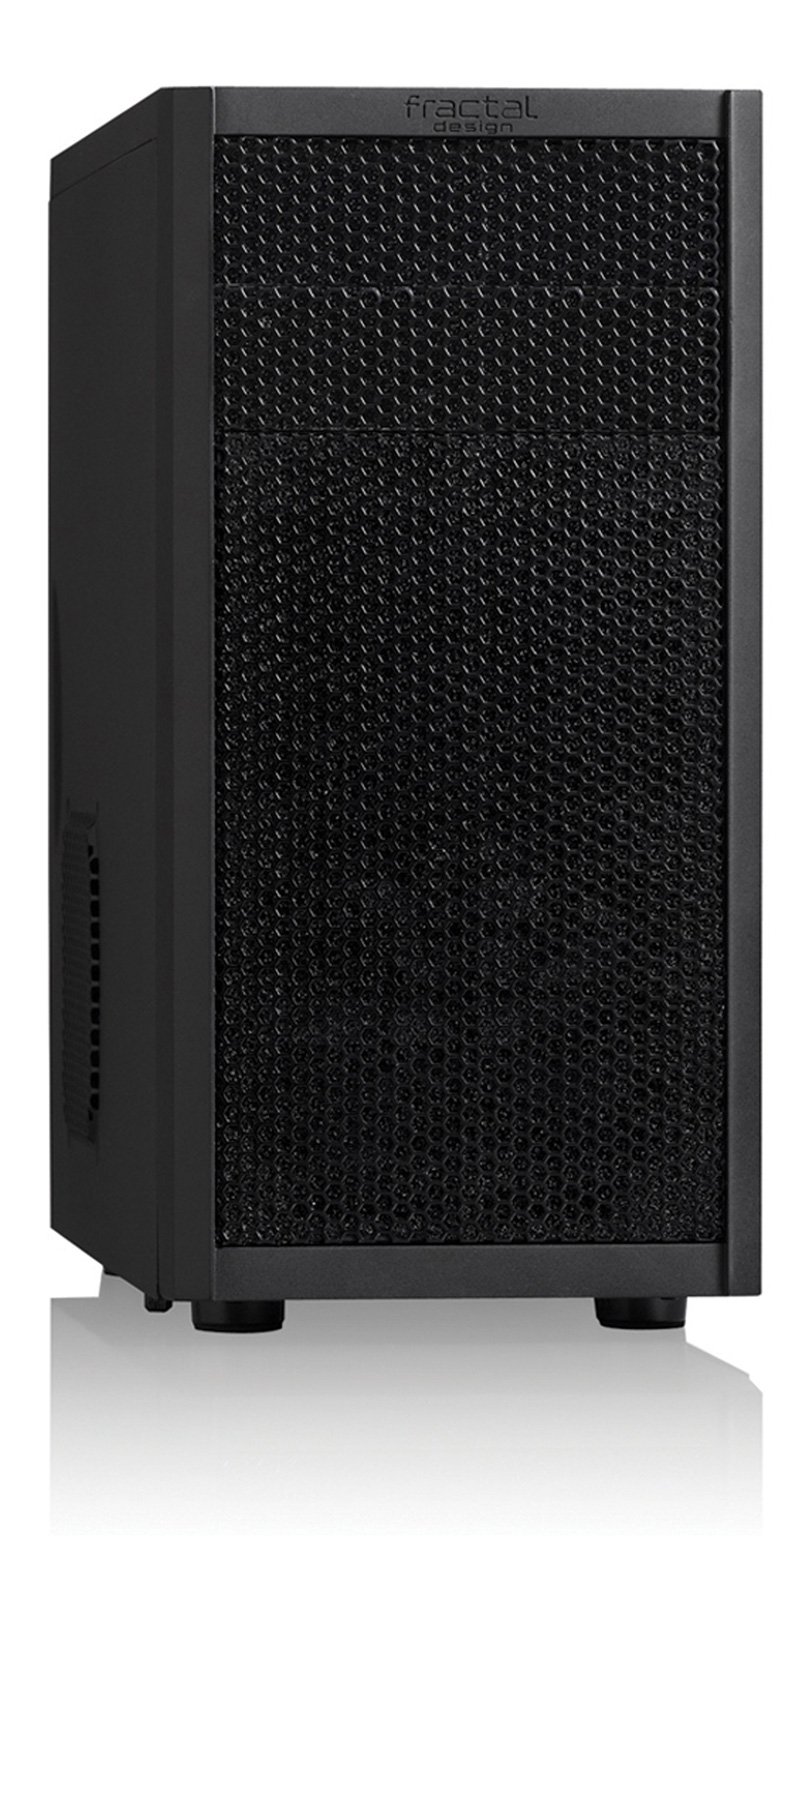 Fractal Design Core 1000 USB 3 - Mini Tower Computer Case - mATX - High Airflow and Cooling - 1x 120mm Silent Fan Included - Brushed Aluminium - Black